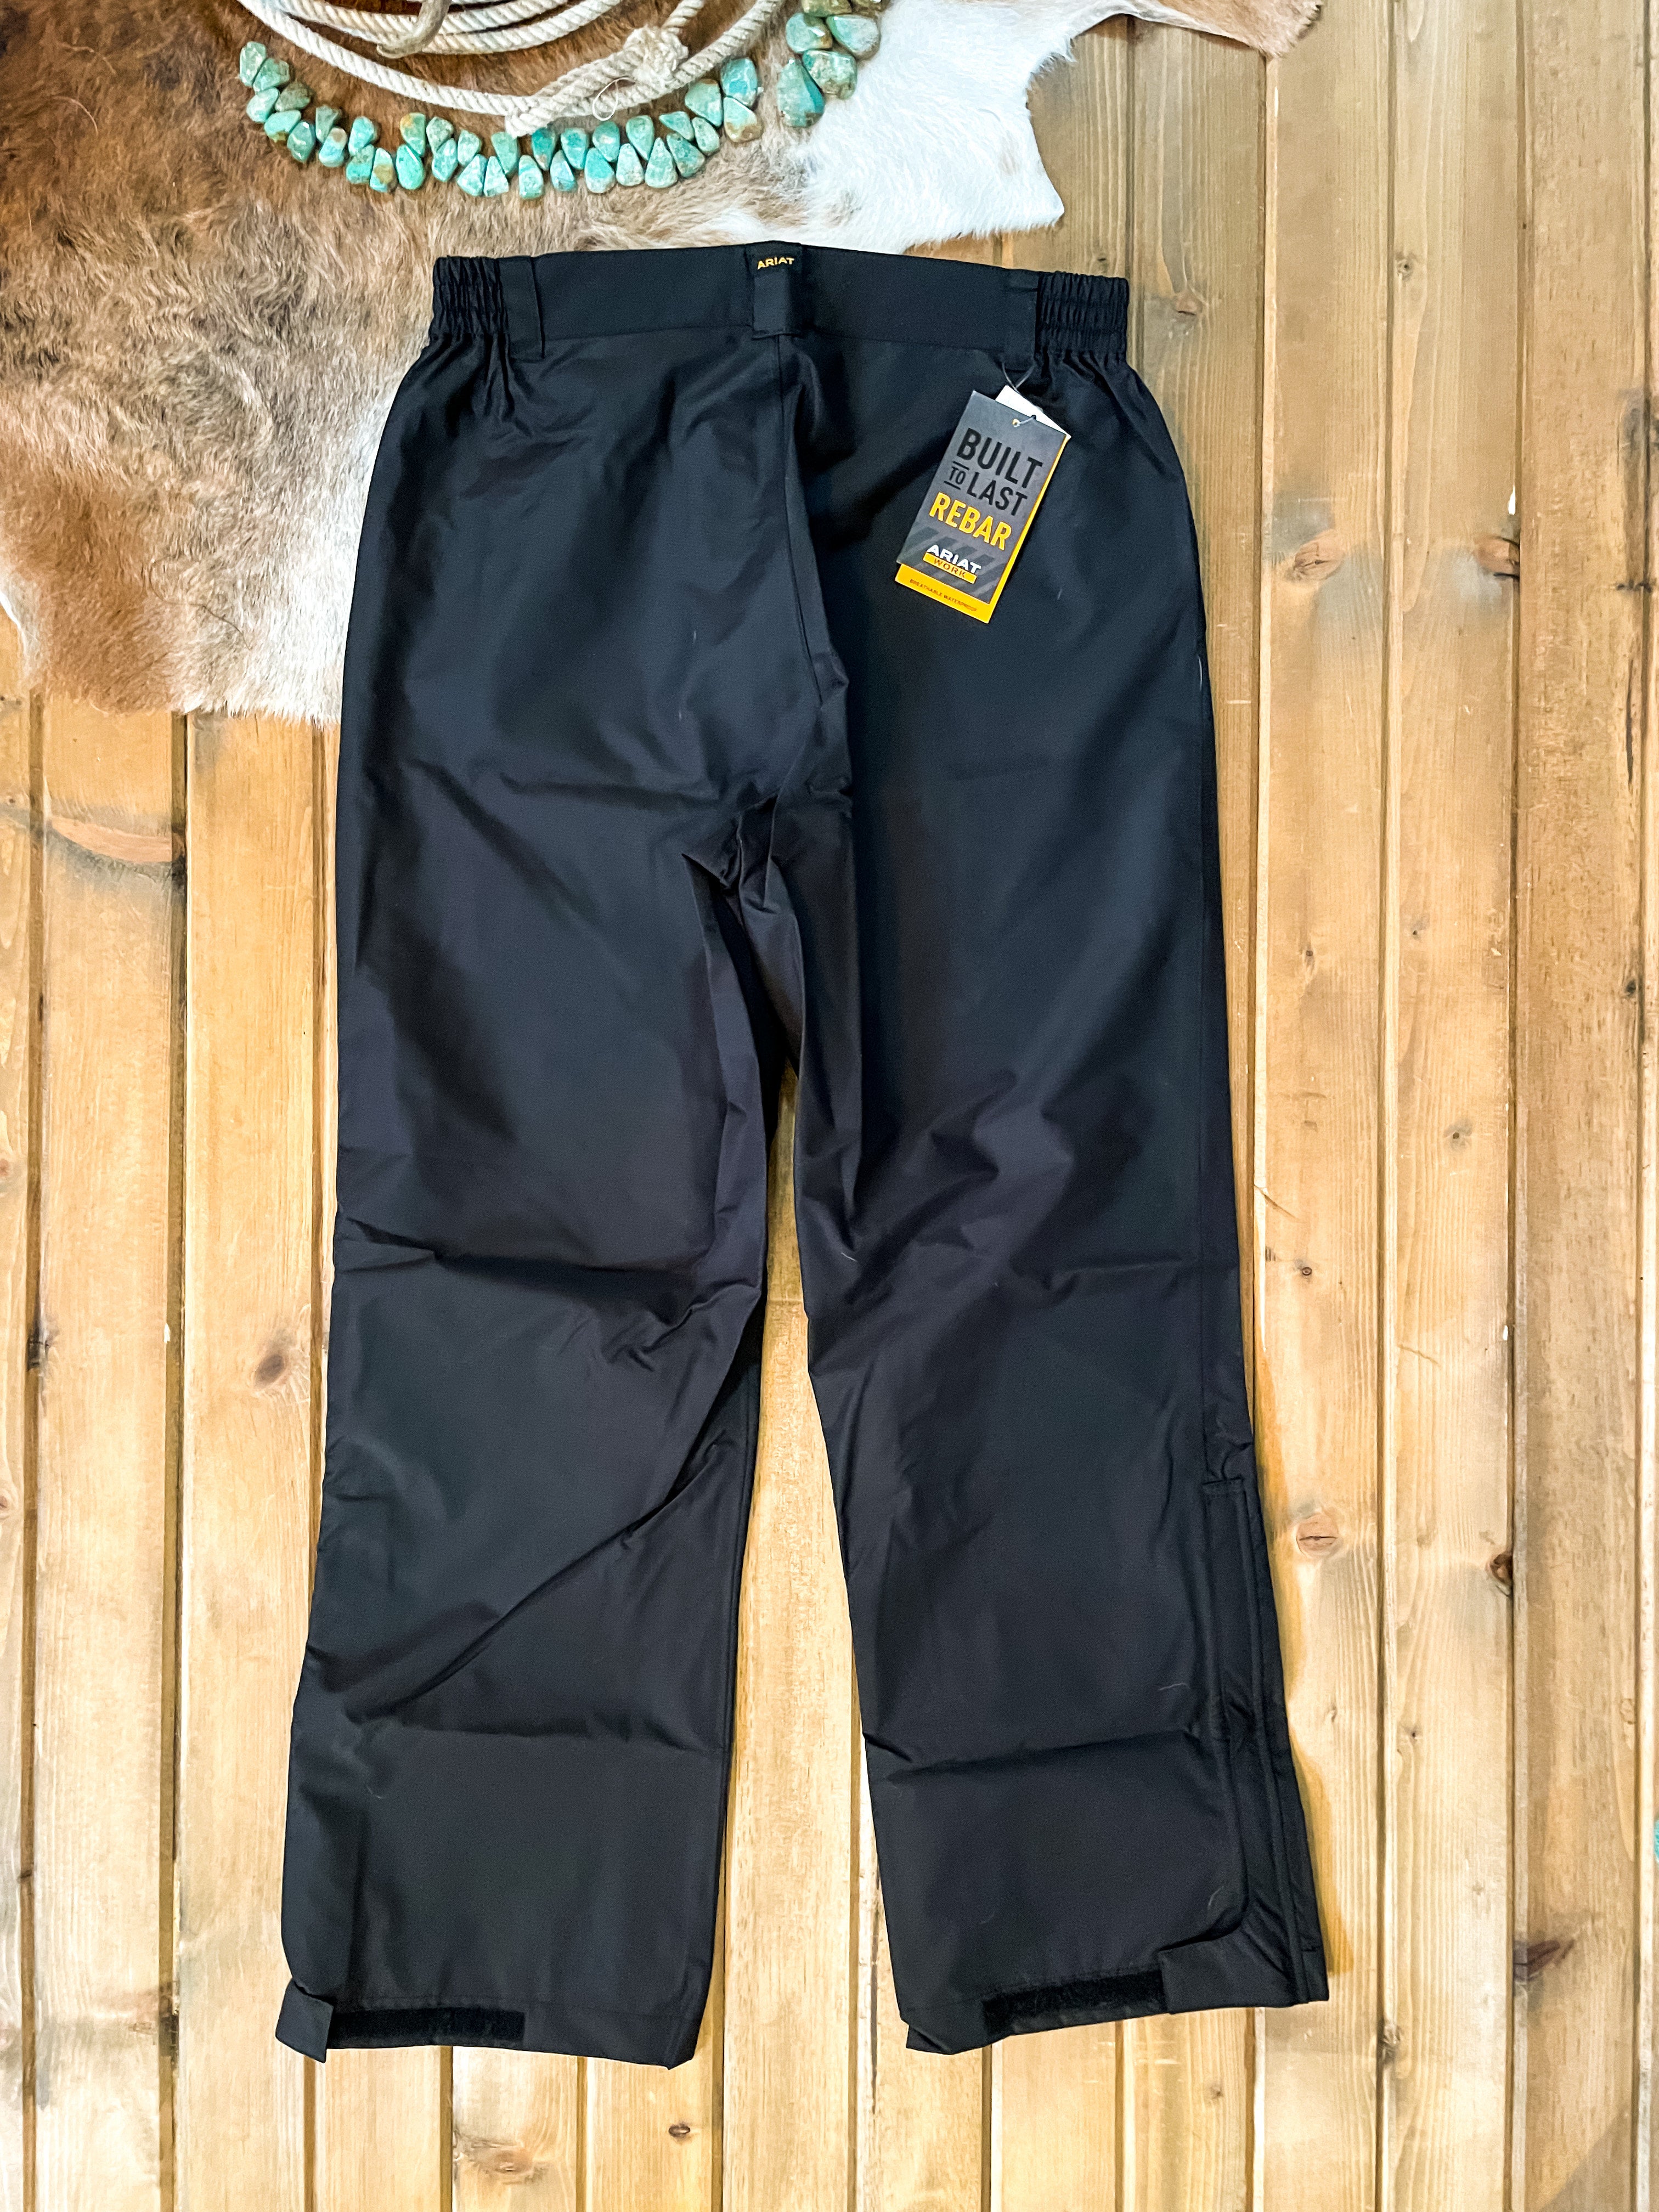 Berghaus Paclite Gore-Tex Overtrousers | Walkhighlands